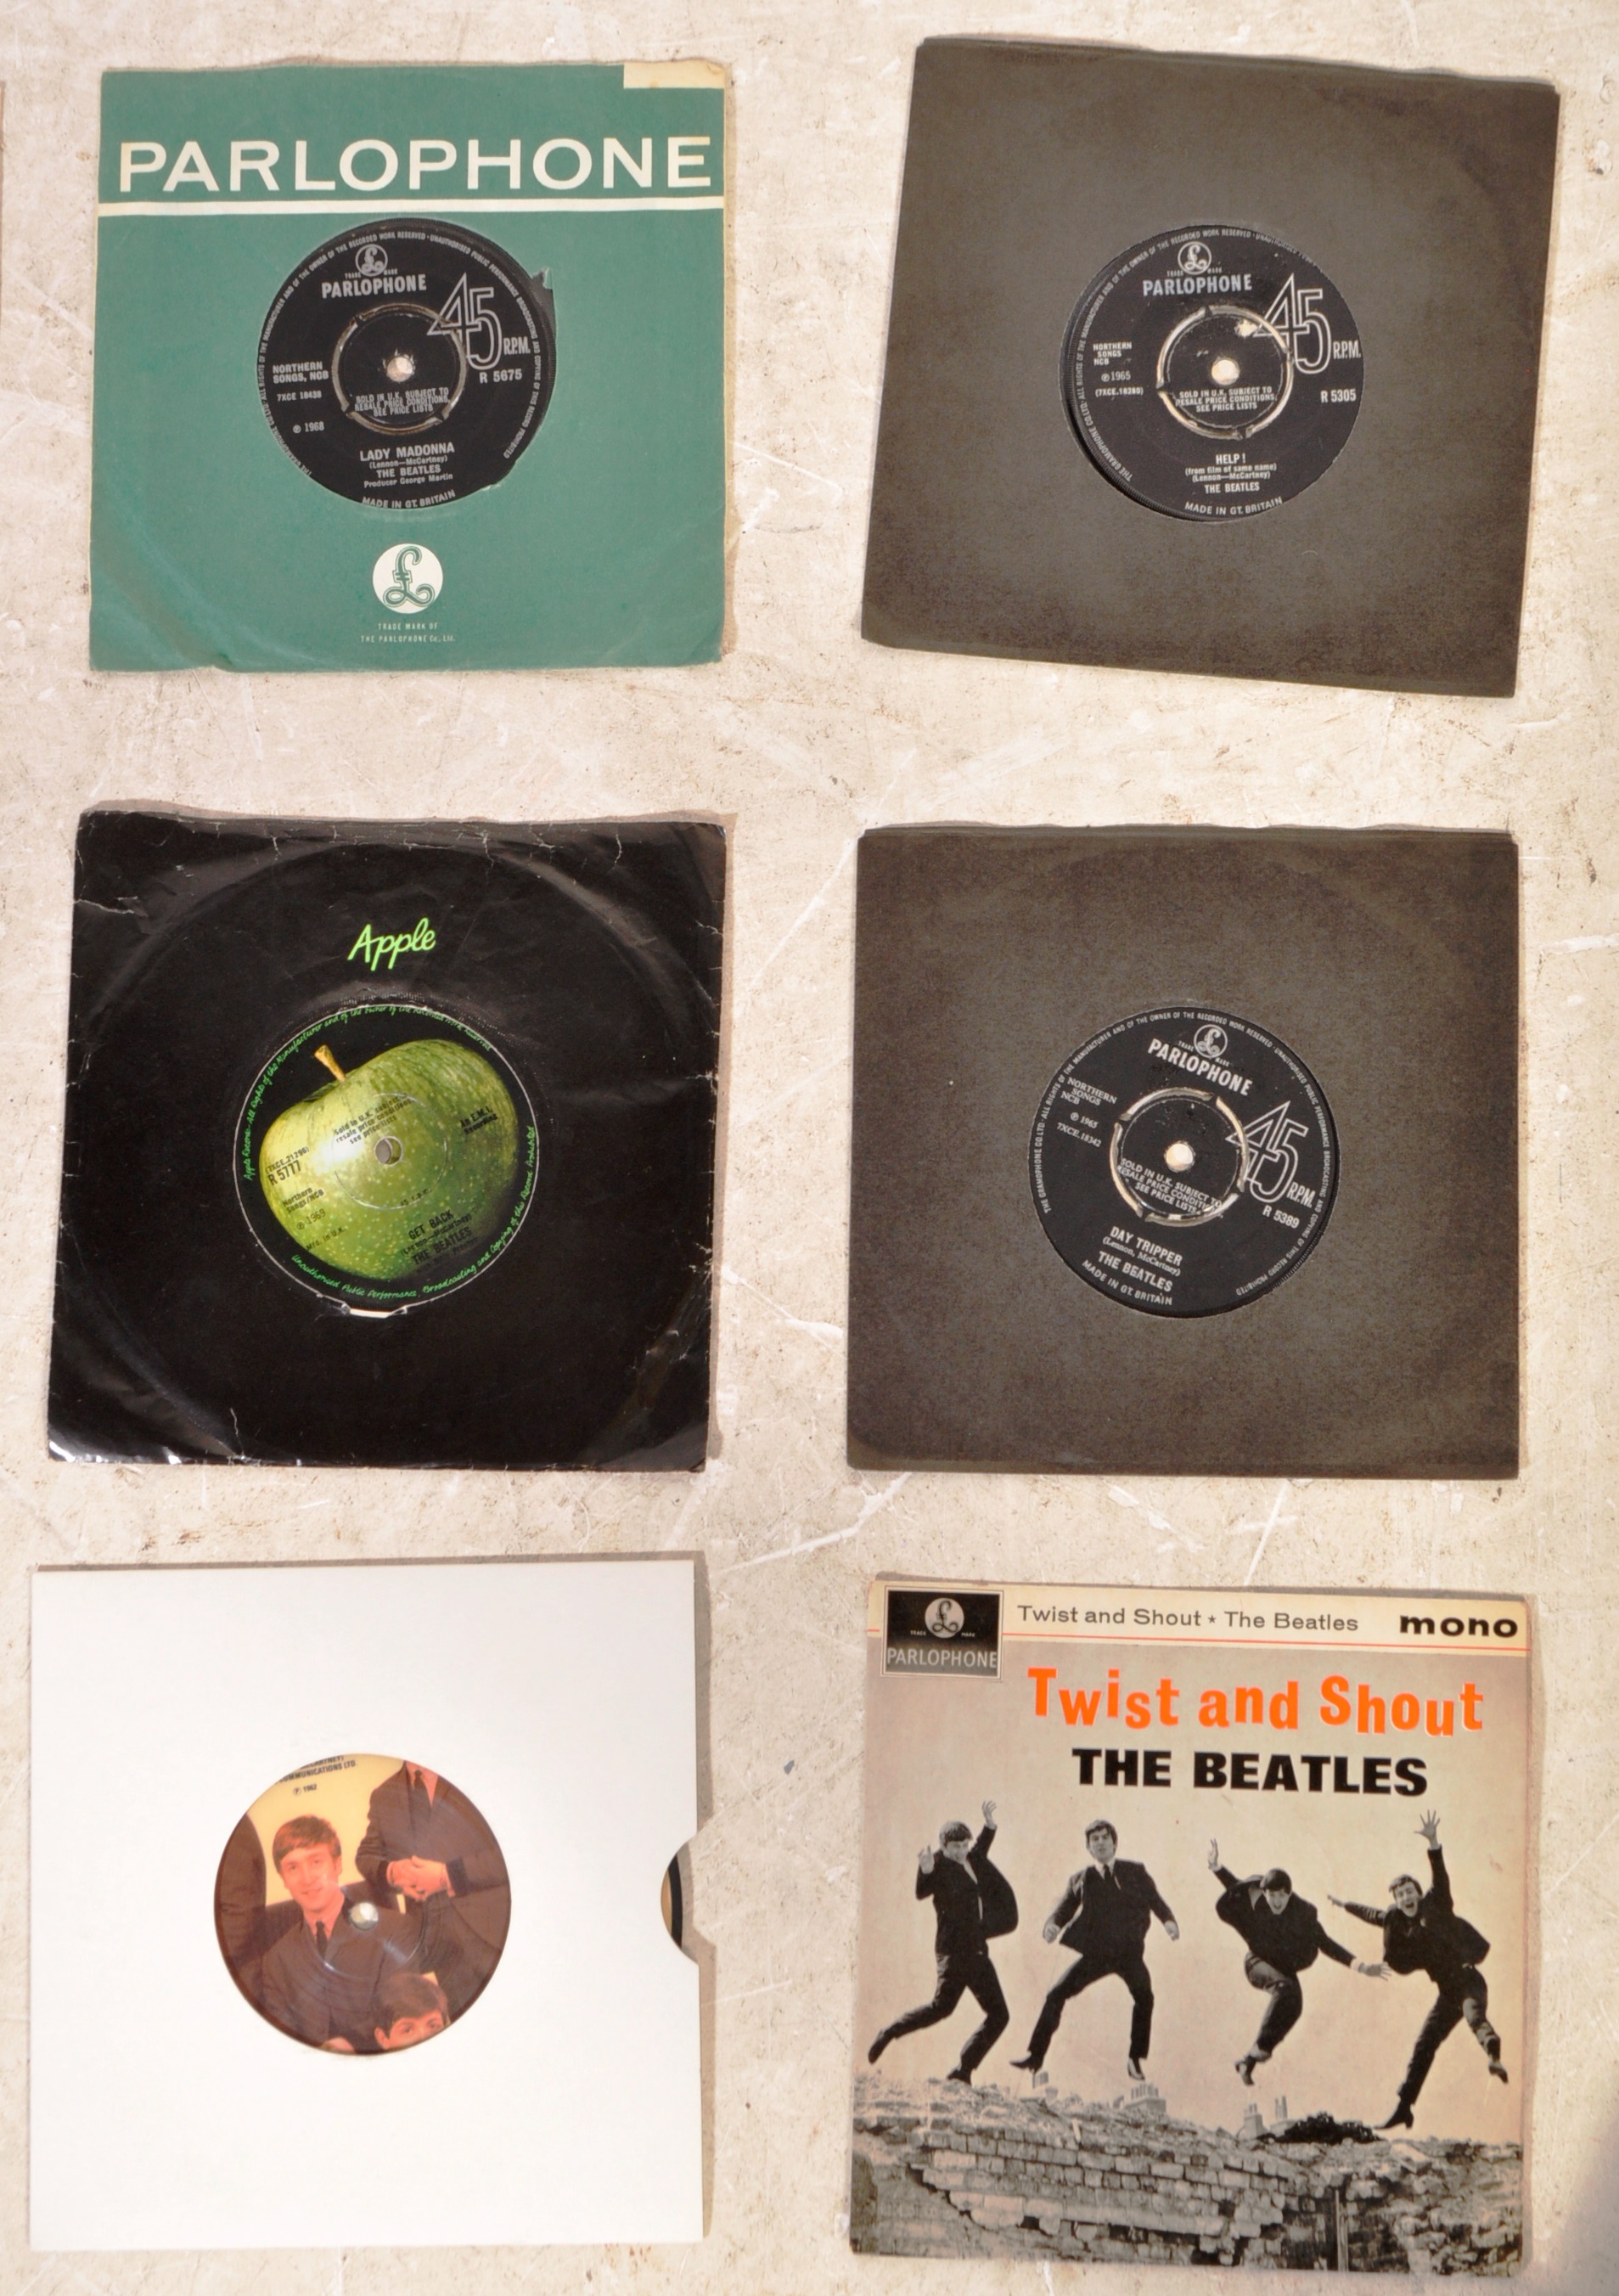 THE BEATLES - SLECTION OF 45RPM 7" VINYL SINGLES - Image 5 of 5